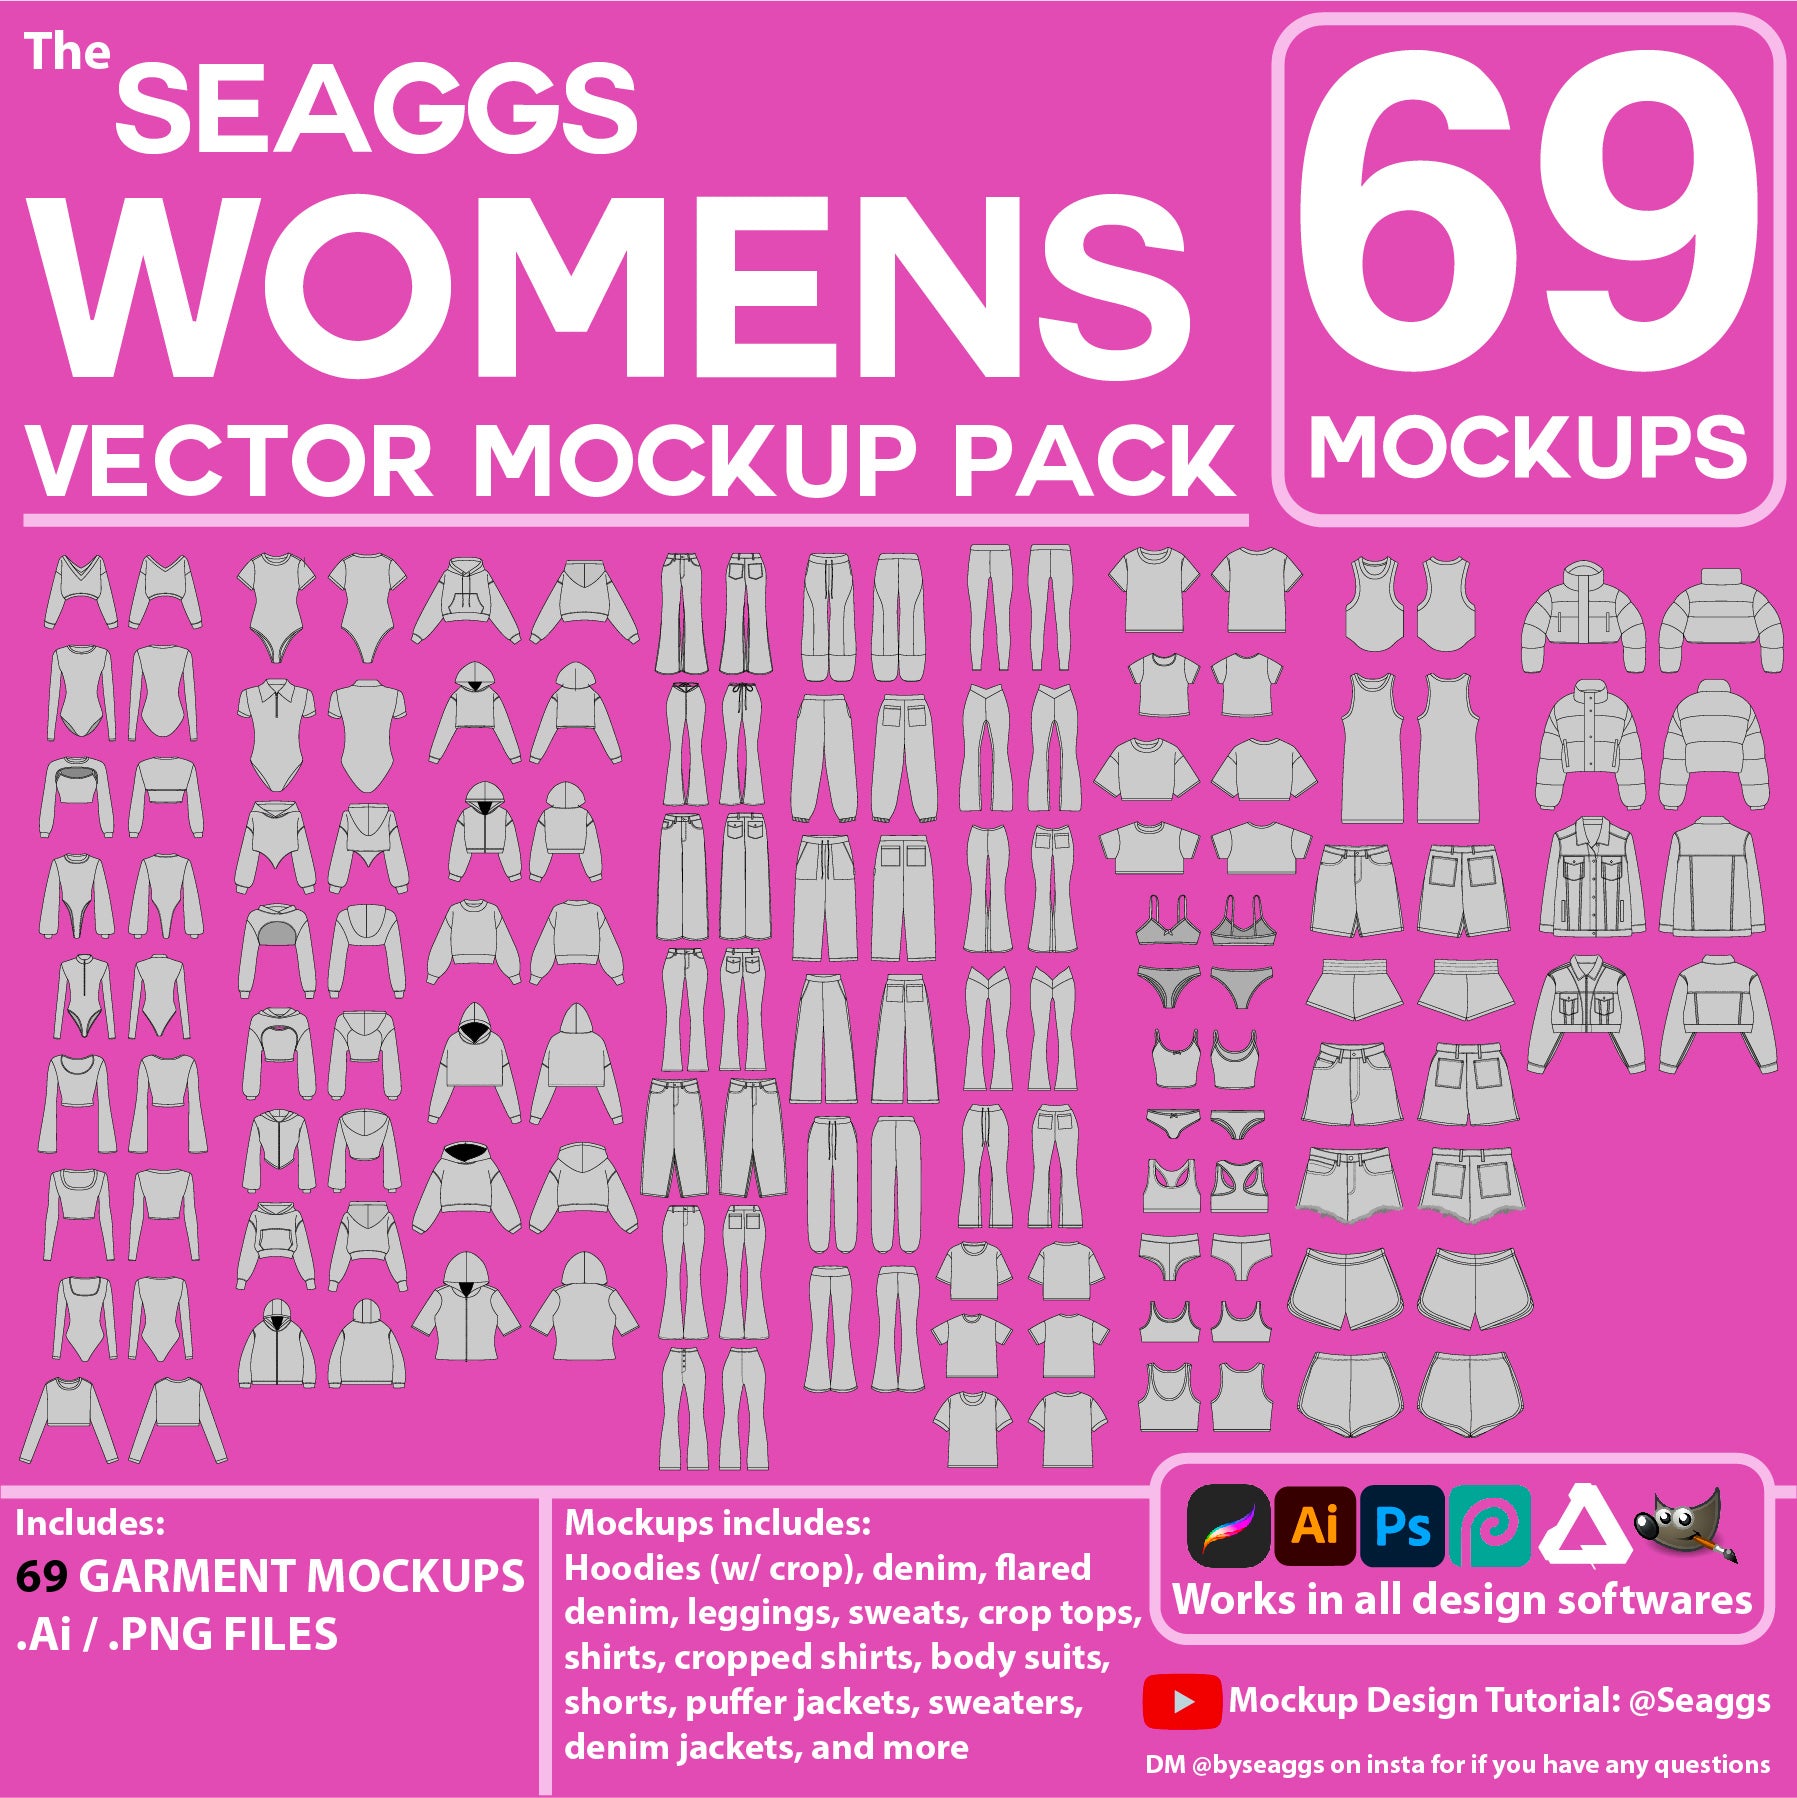 Seaggs Women's Vector Mockup Pack